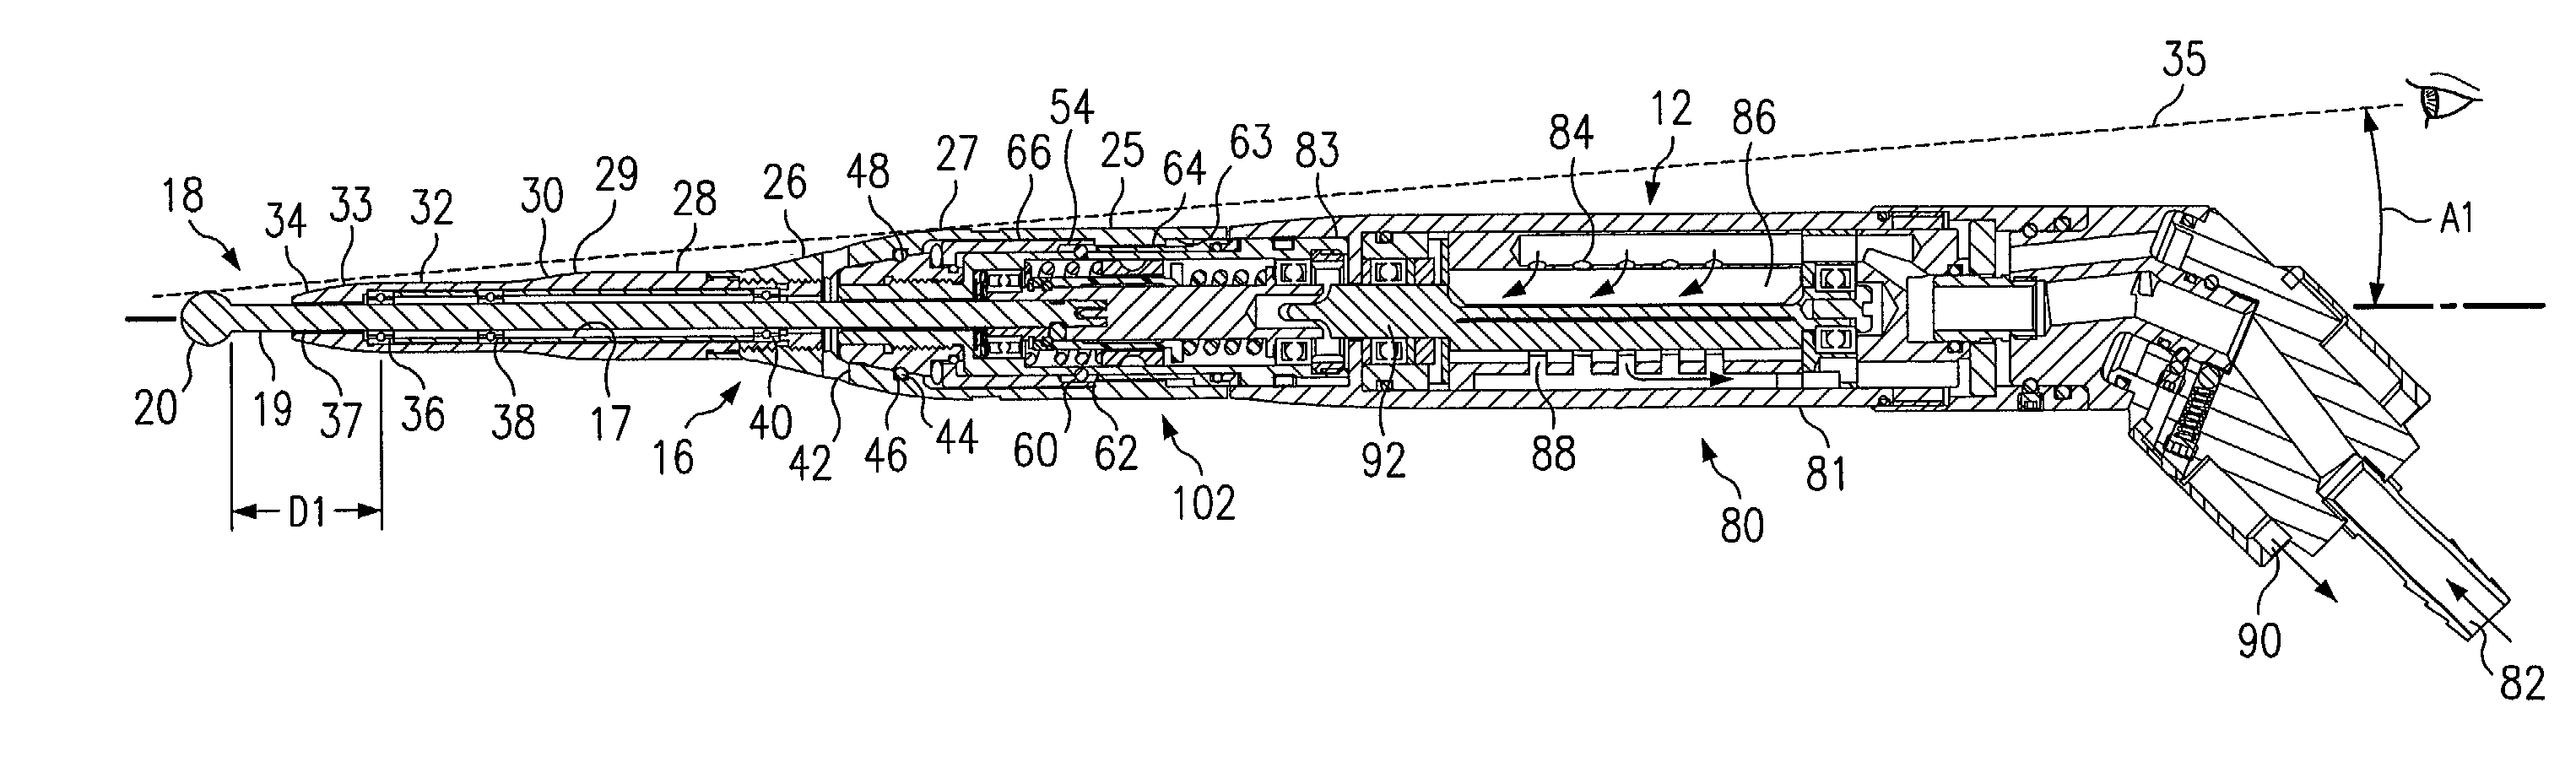 Surgical instrument with rotary cutting member and quick release coupling arrangement